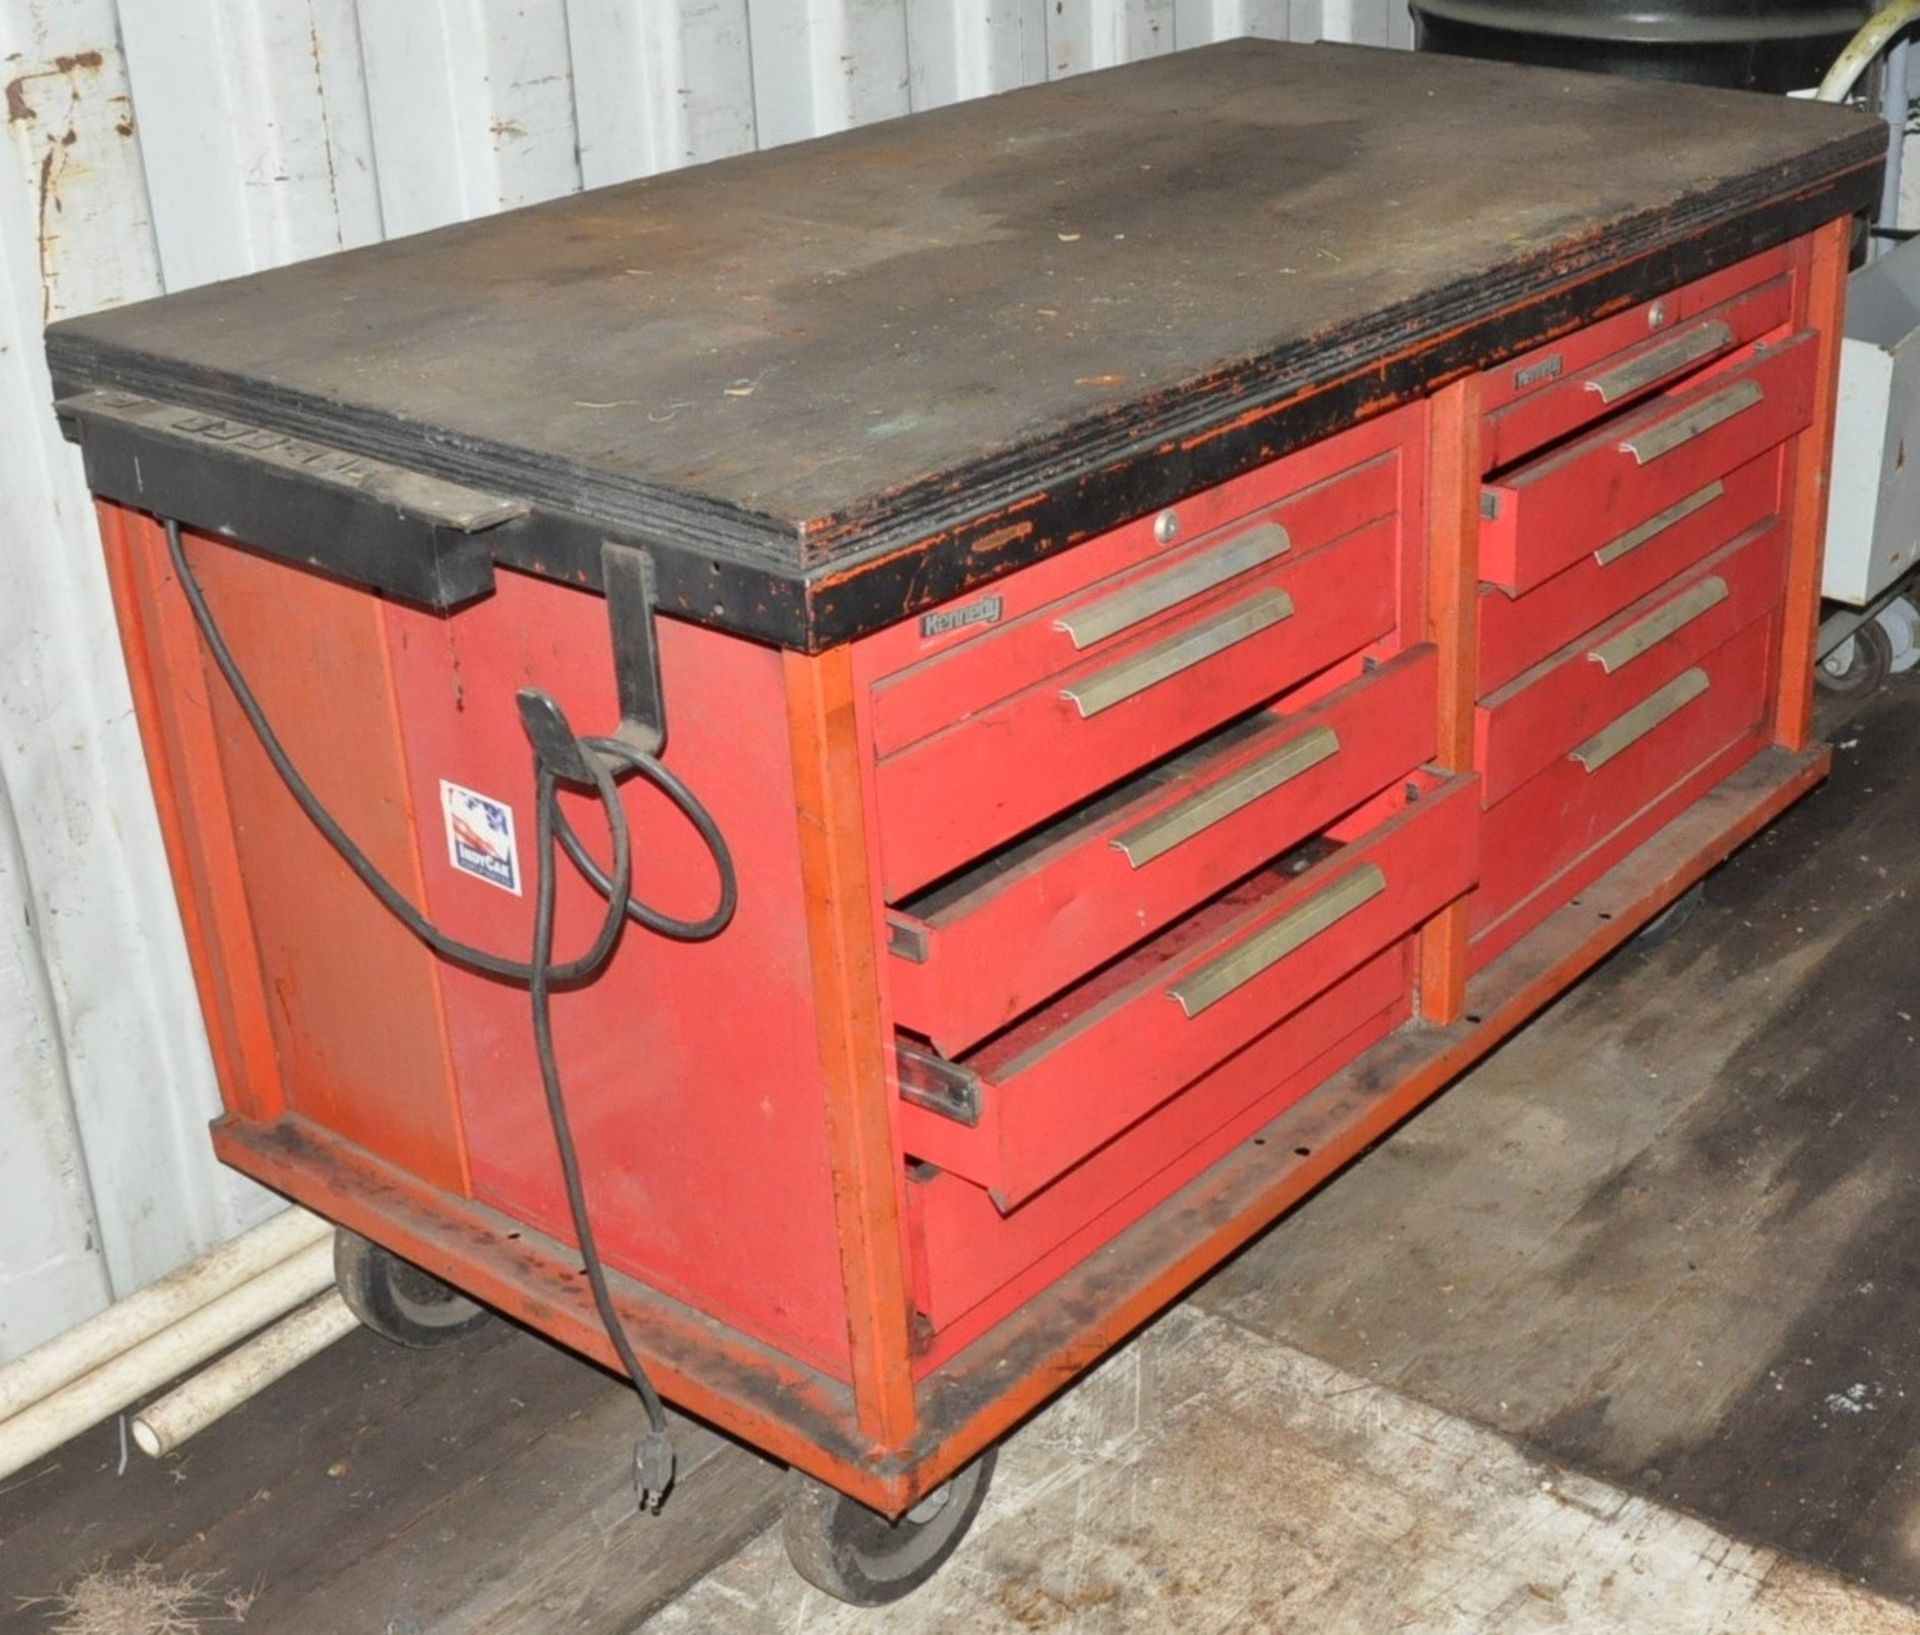 (2) KENNEDY 10-DRAWER PORTABLE TOOLING CABINET/BENCH CARTS, (INSIDE OVERSEAS CONTAINER LOT 301) - Image 2 of 2